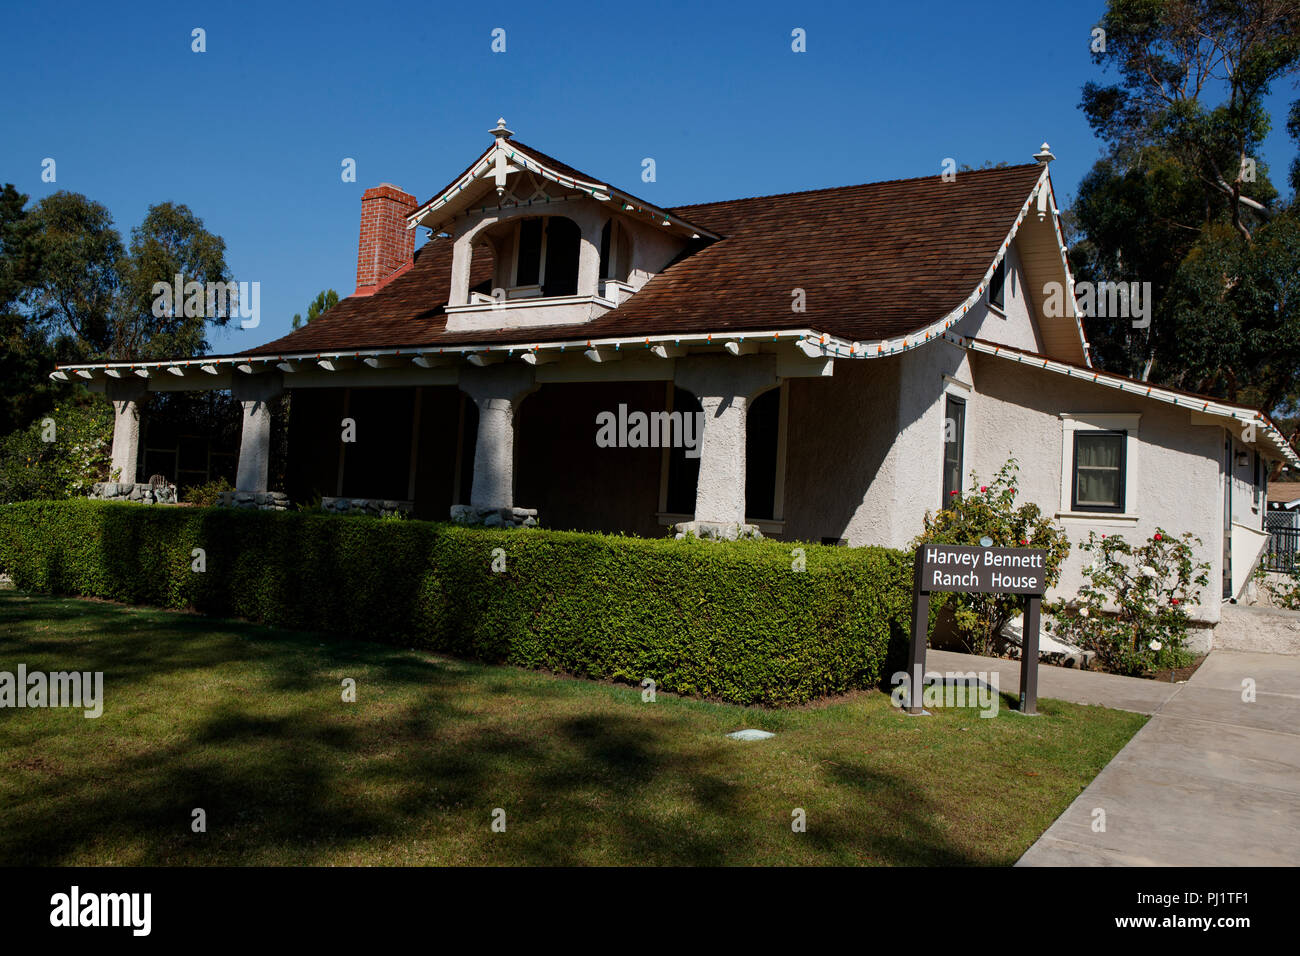 Harvey Bennett Ranch House at the Heritage Hill Historical Park, Lake Forest, California, United States of America Stock Photo